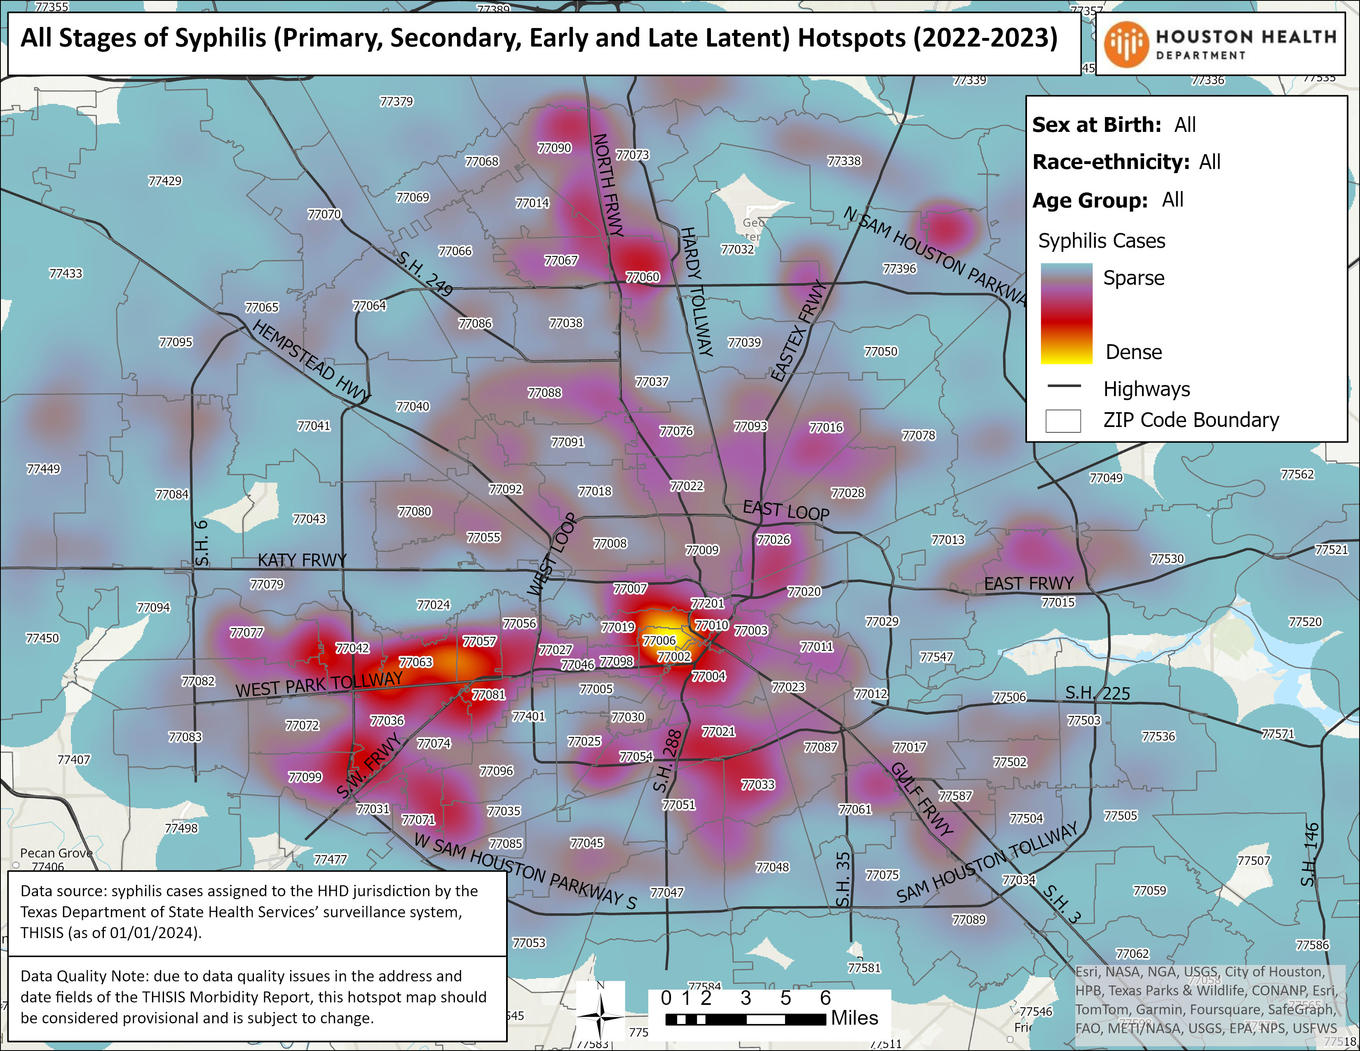 All Stage of Syphilis(Primary, Secondary, Early and Late Latent) Hotspots (2022-2023). Sex at birth: all